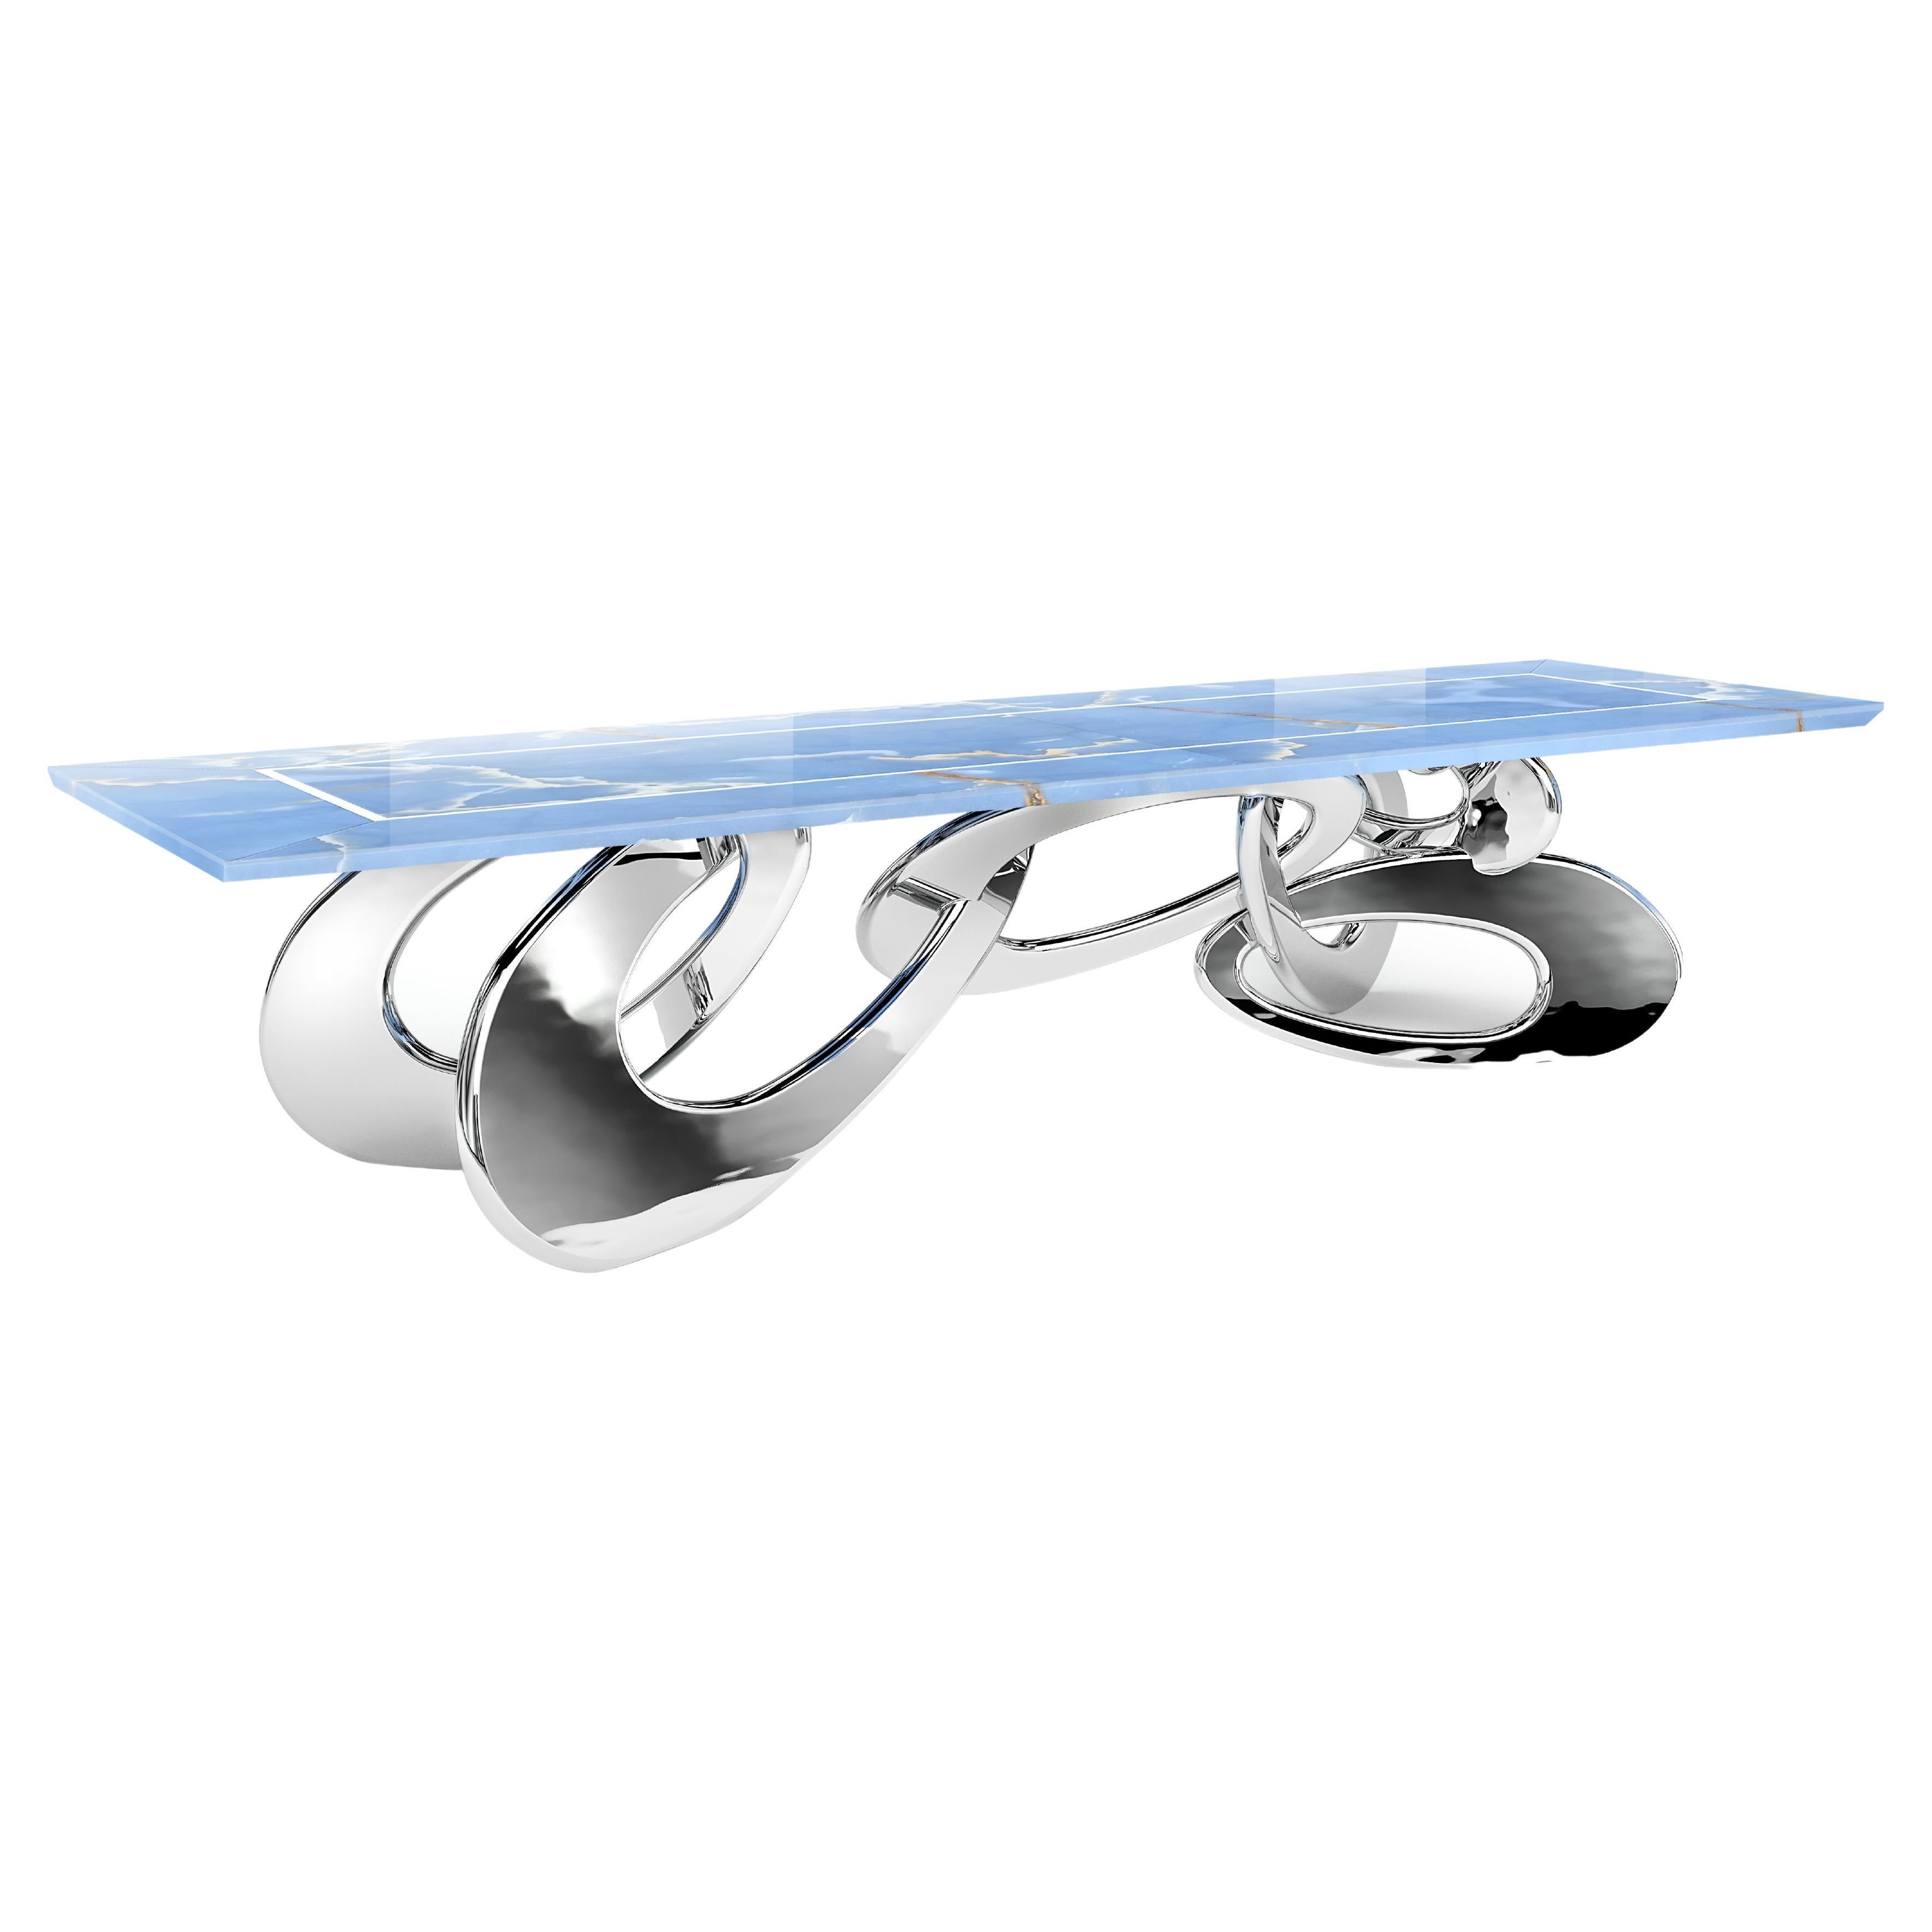 Dining Table Rings Mirror Steel Base Sculpture Top Blue Onyx Marble Made Italy